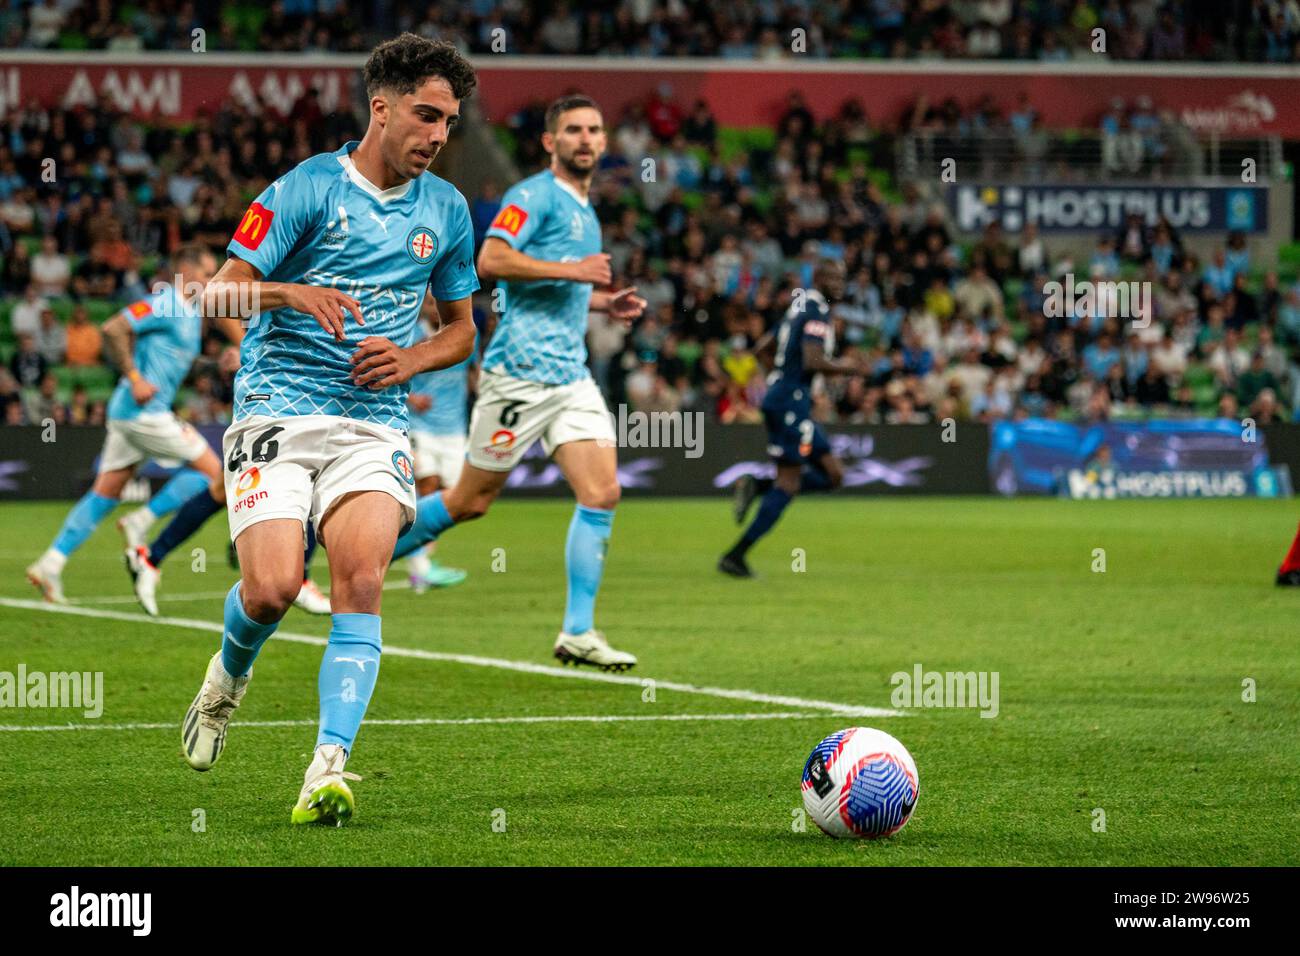 Melbourne, Australia. 23 December, 2023. Melbourne City FC Forward Benjamin Mazzeo (#46) prepares to clear the ball out from defence during the Isuzu UTE A-League match between Melbourne City FC and Melbourne Victory FC at AAMI Park in Melbourne, Australia. Credit: James Forrester/Alamy Live News Stock Photo